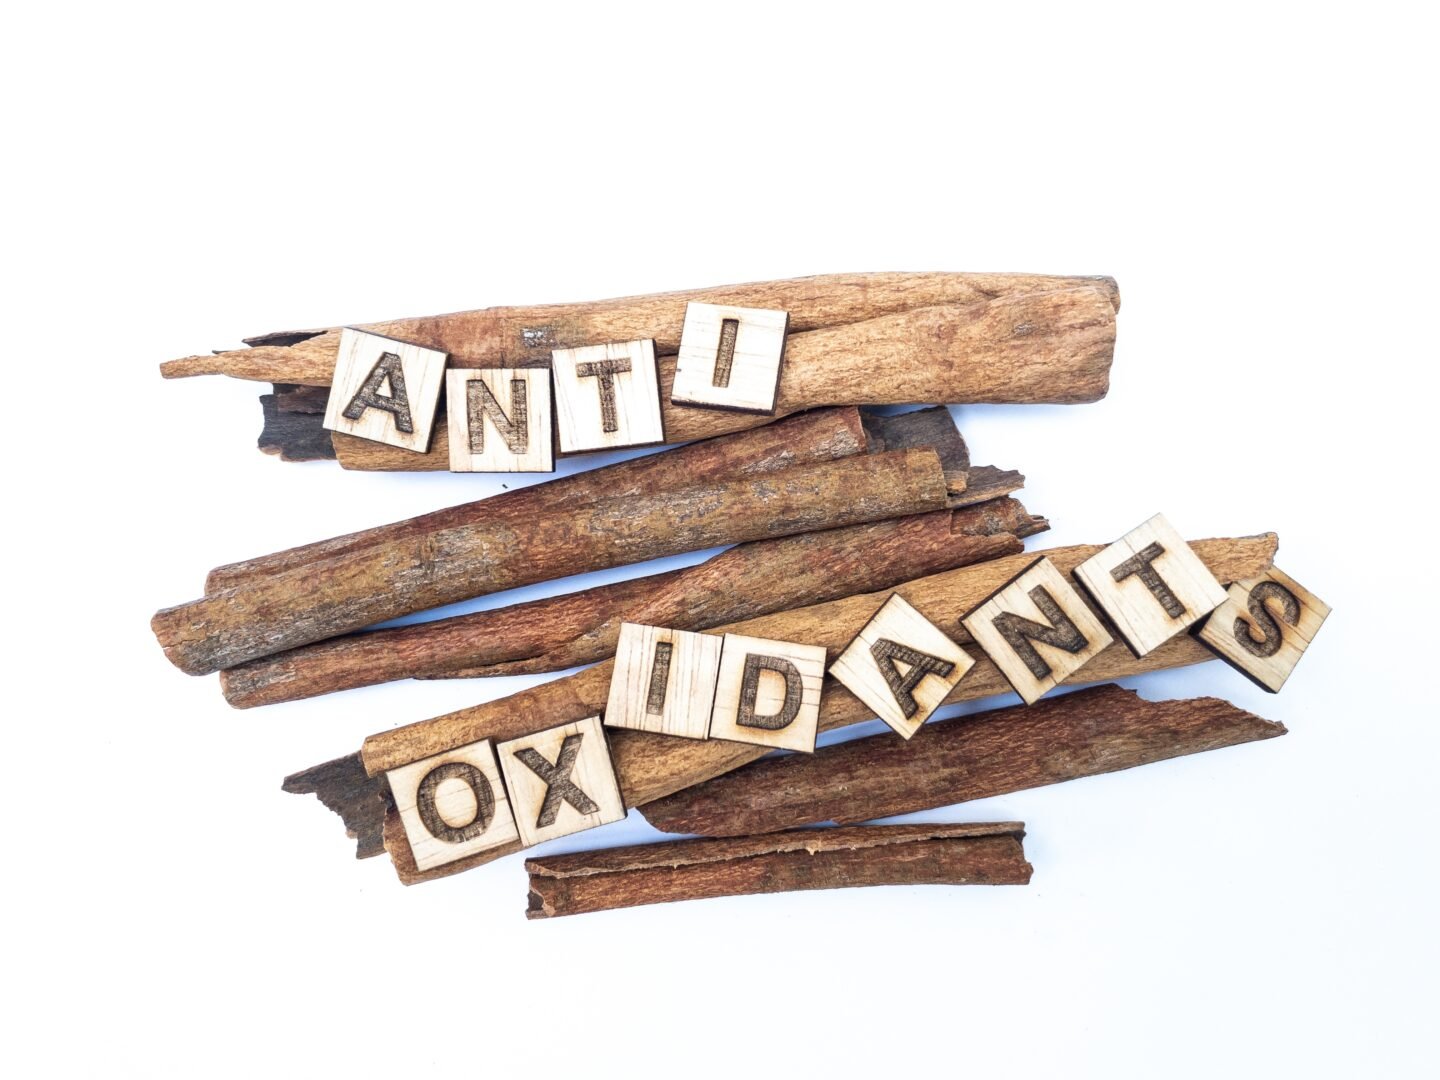 Antioxidants,In,Cinnamon,Benefits,For,Anti,Aging,And,Fight,Cancer